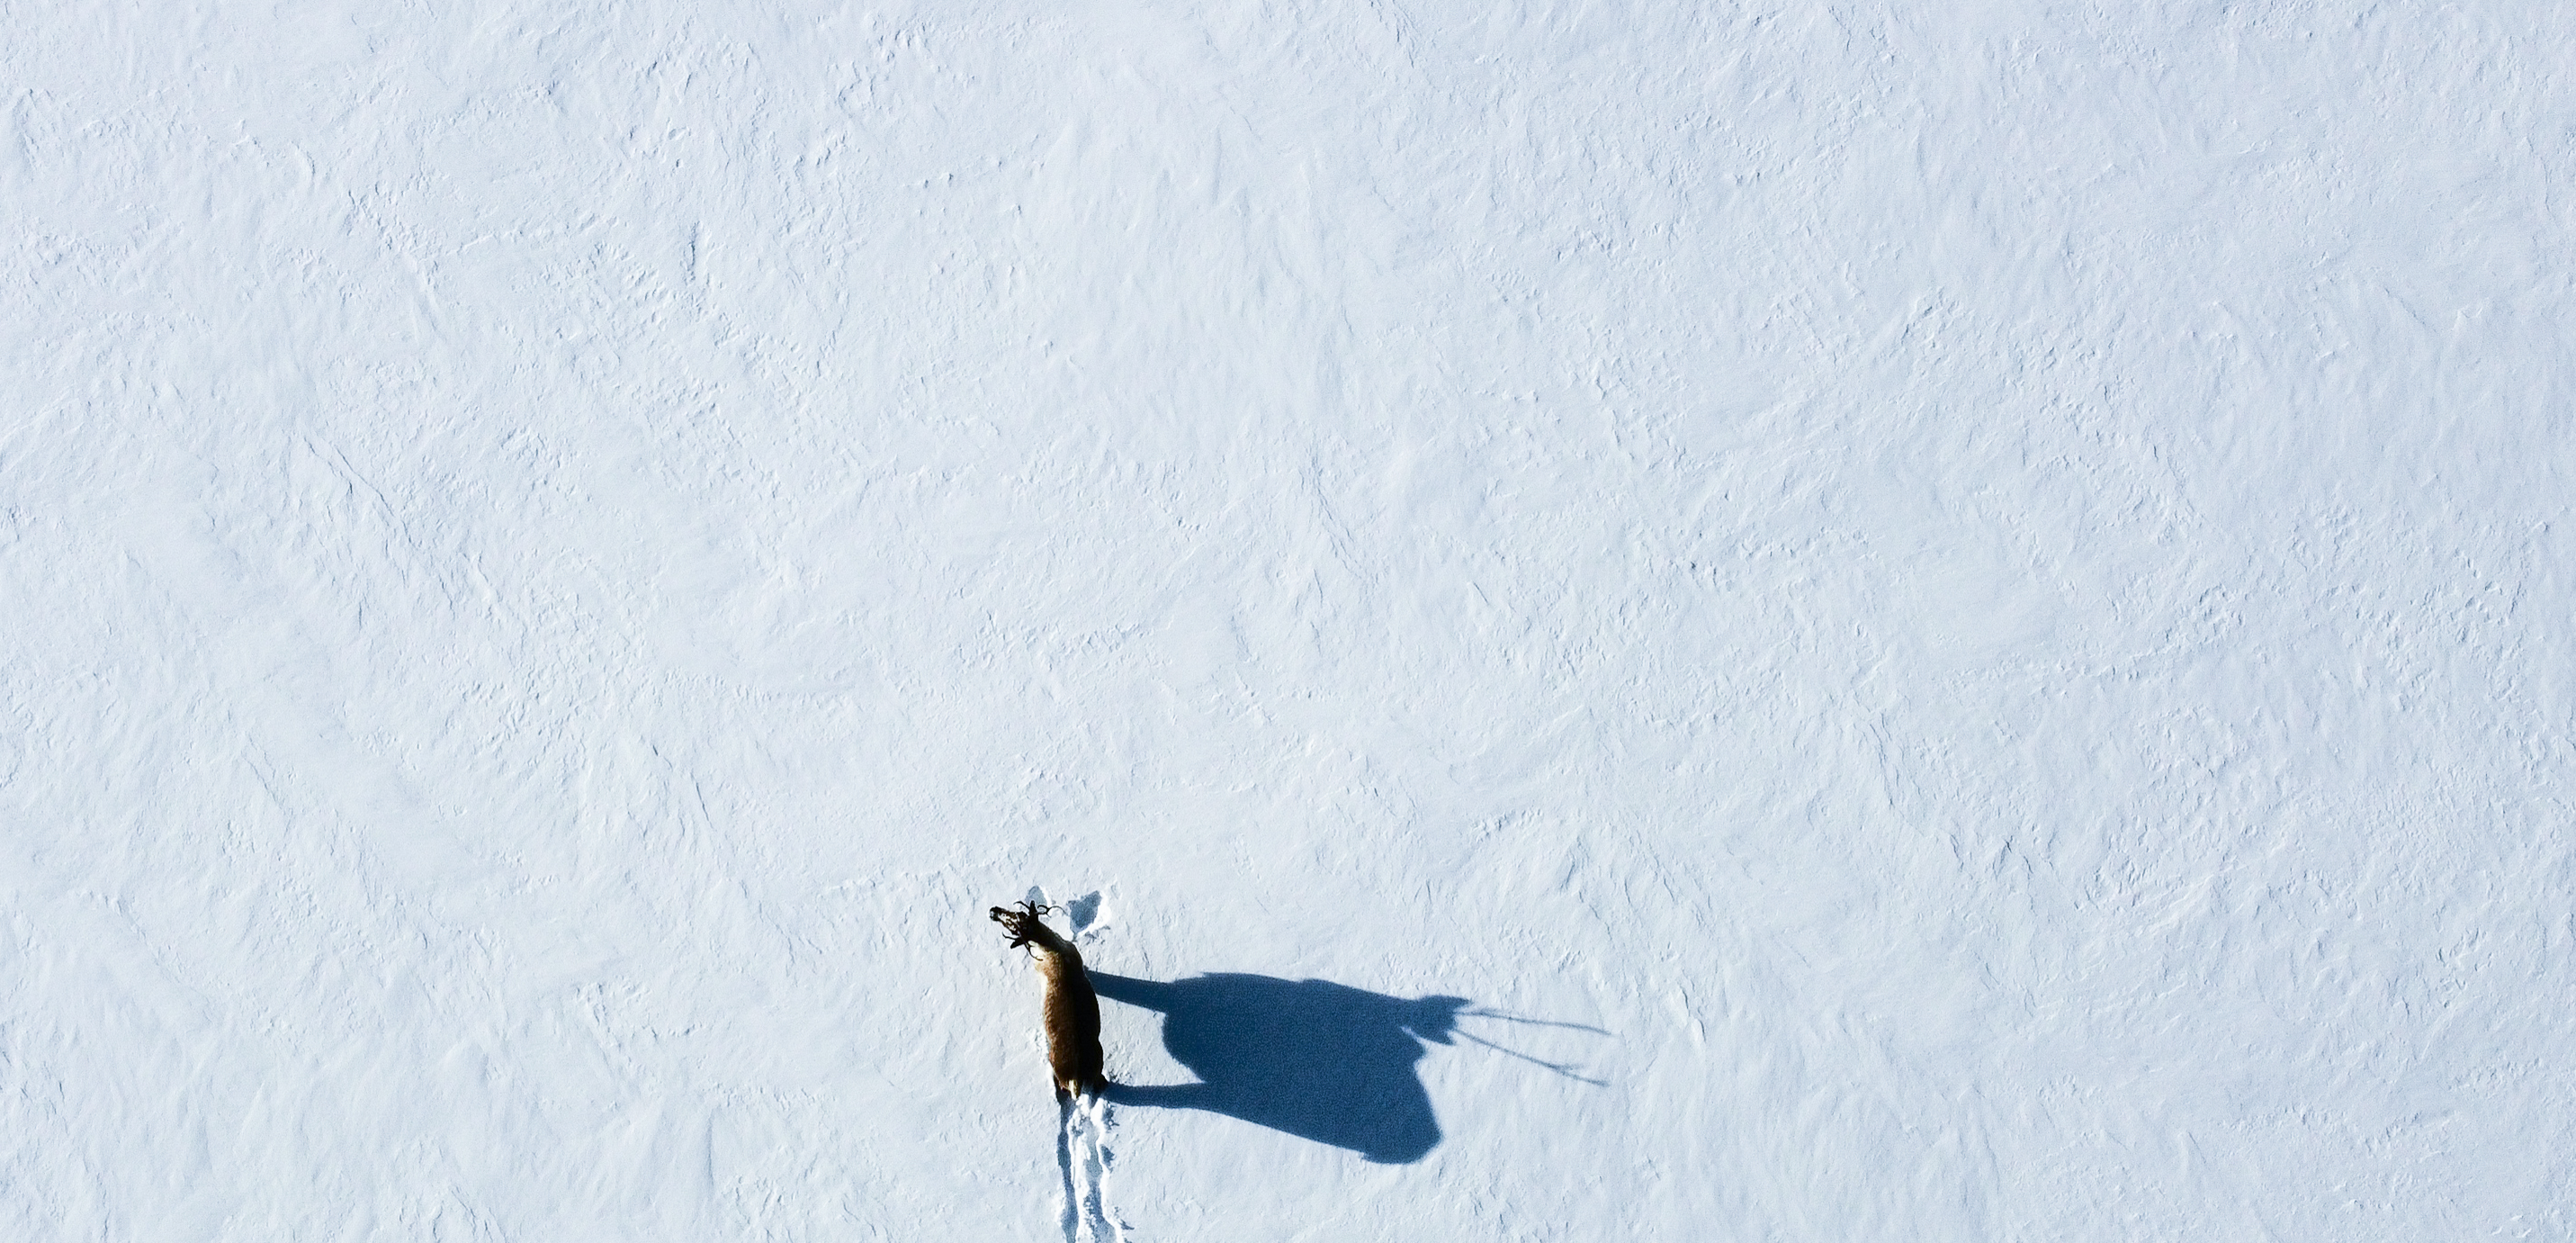 A bird's-eye view of a caribou standing alone in the snow